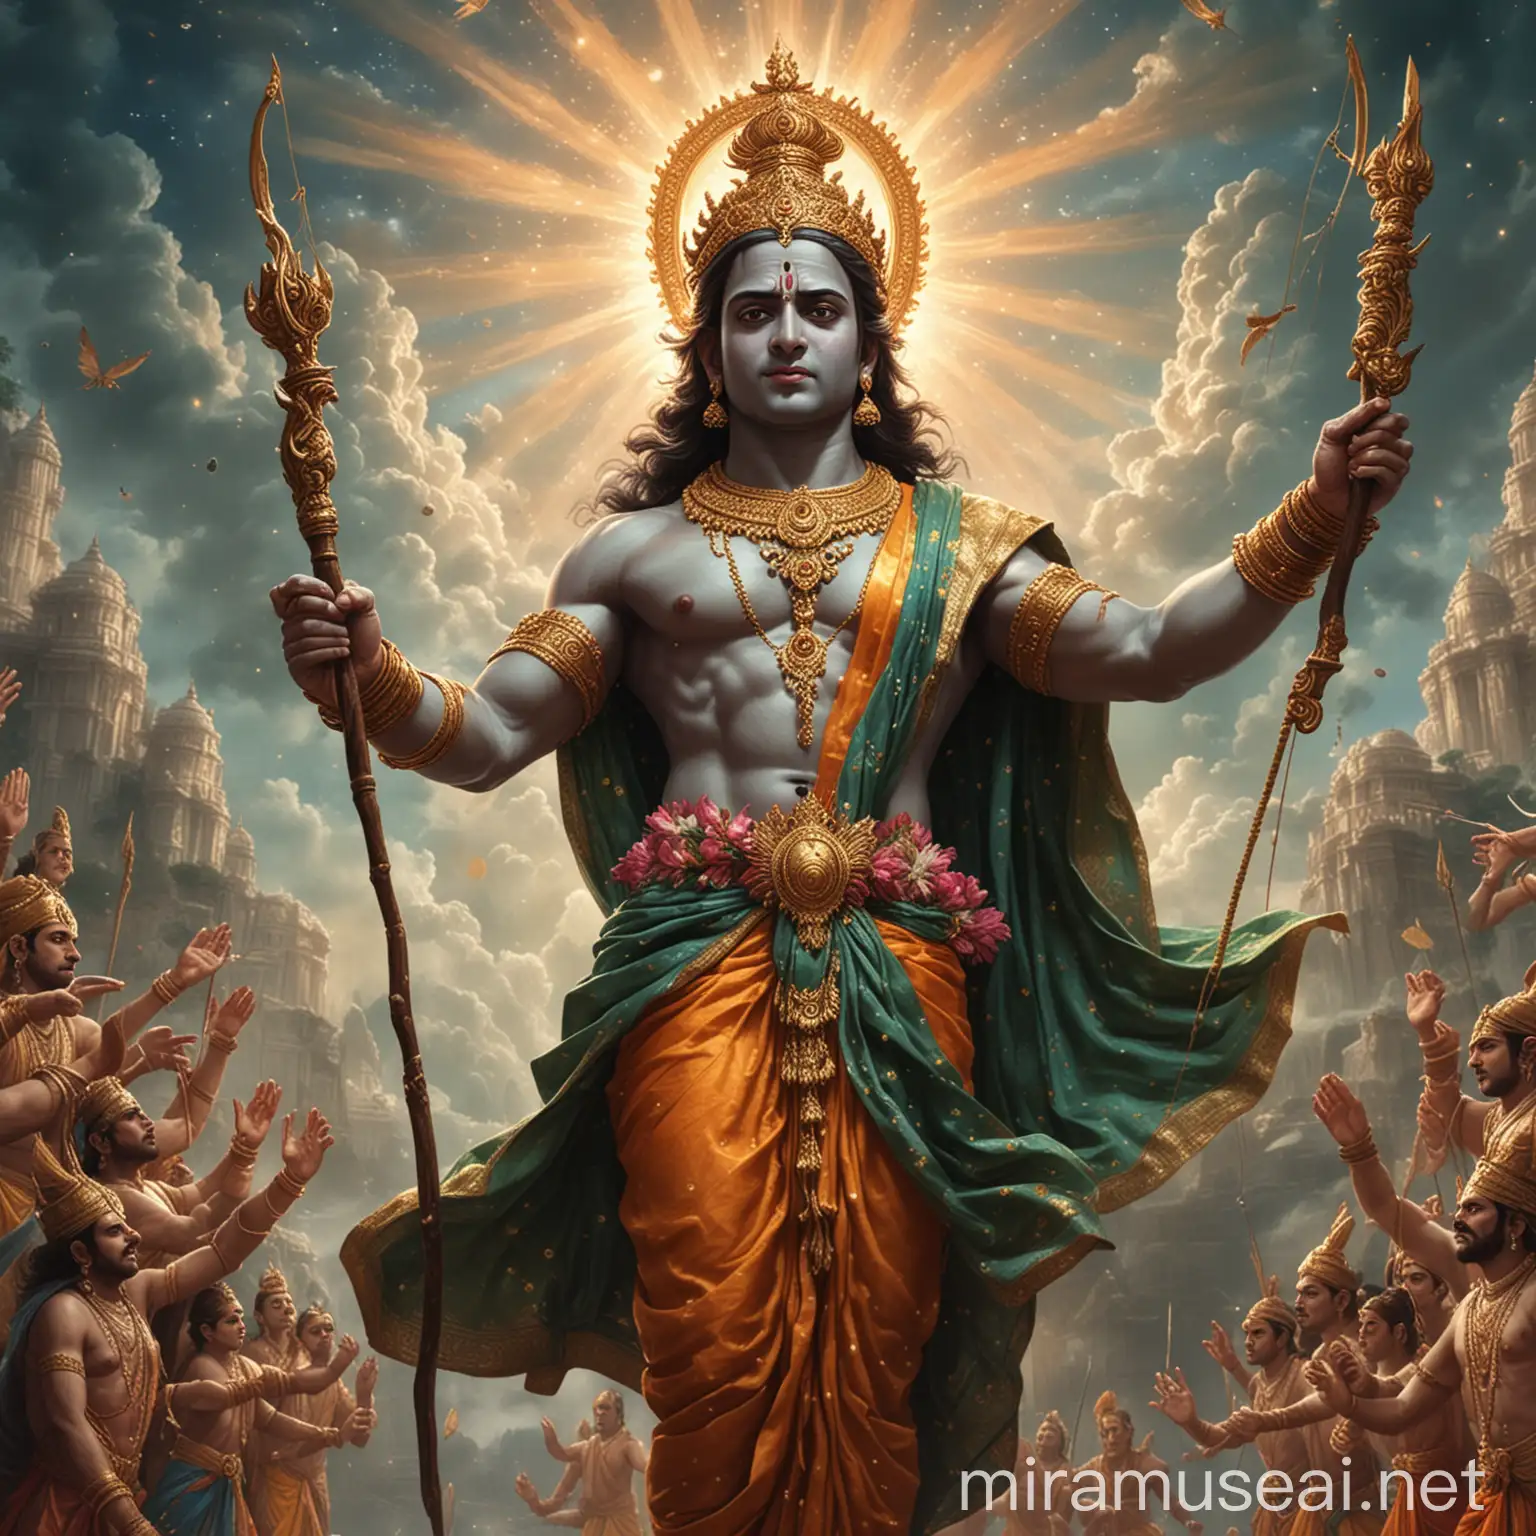 Create a vivid and awe-inspiring scene capturing the divine moment when Lord Rama, adorned in regal attire and wielding a bow, stands in the foreground, emanating kingly grace. Behind him, a celestial spectacle unfolds as a colossal avatar of Lord Vishnu manifests in the sky, adorned with four divine hands, radiating an aura of transcendental power, hyper realistic, photoreal